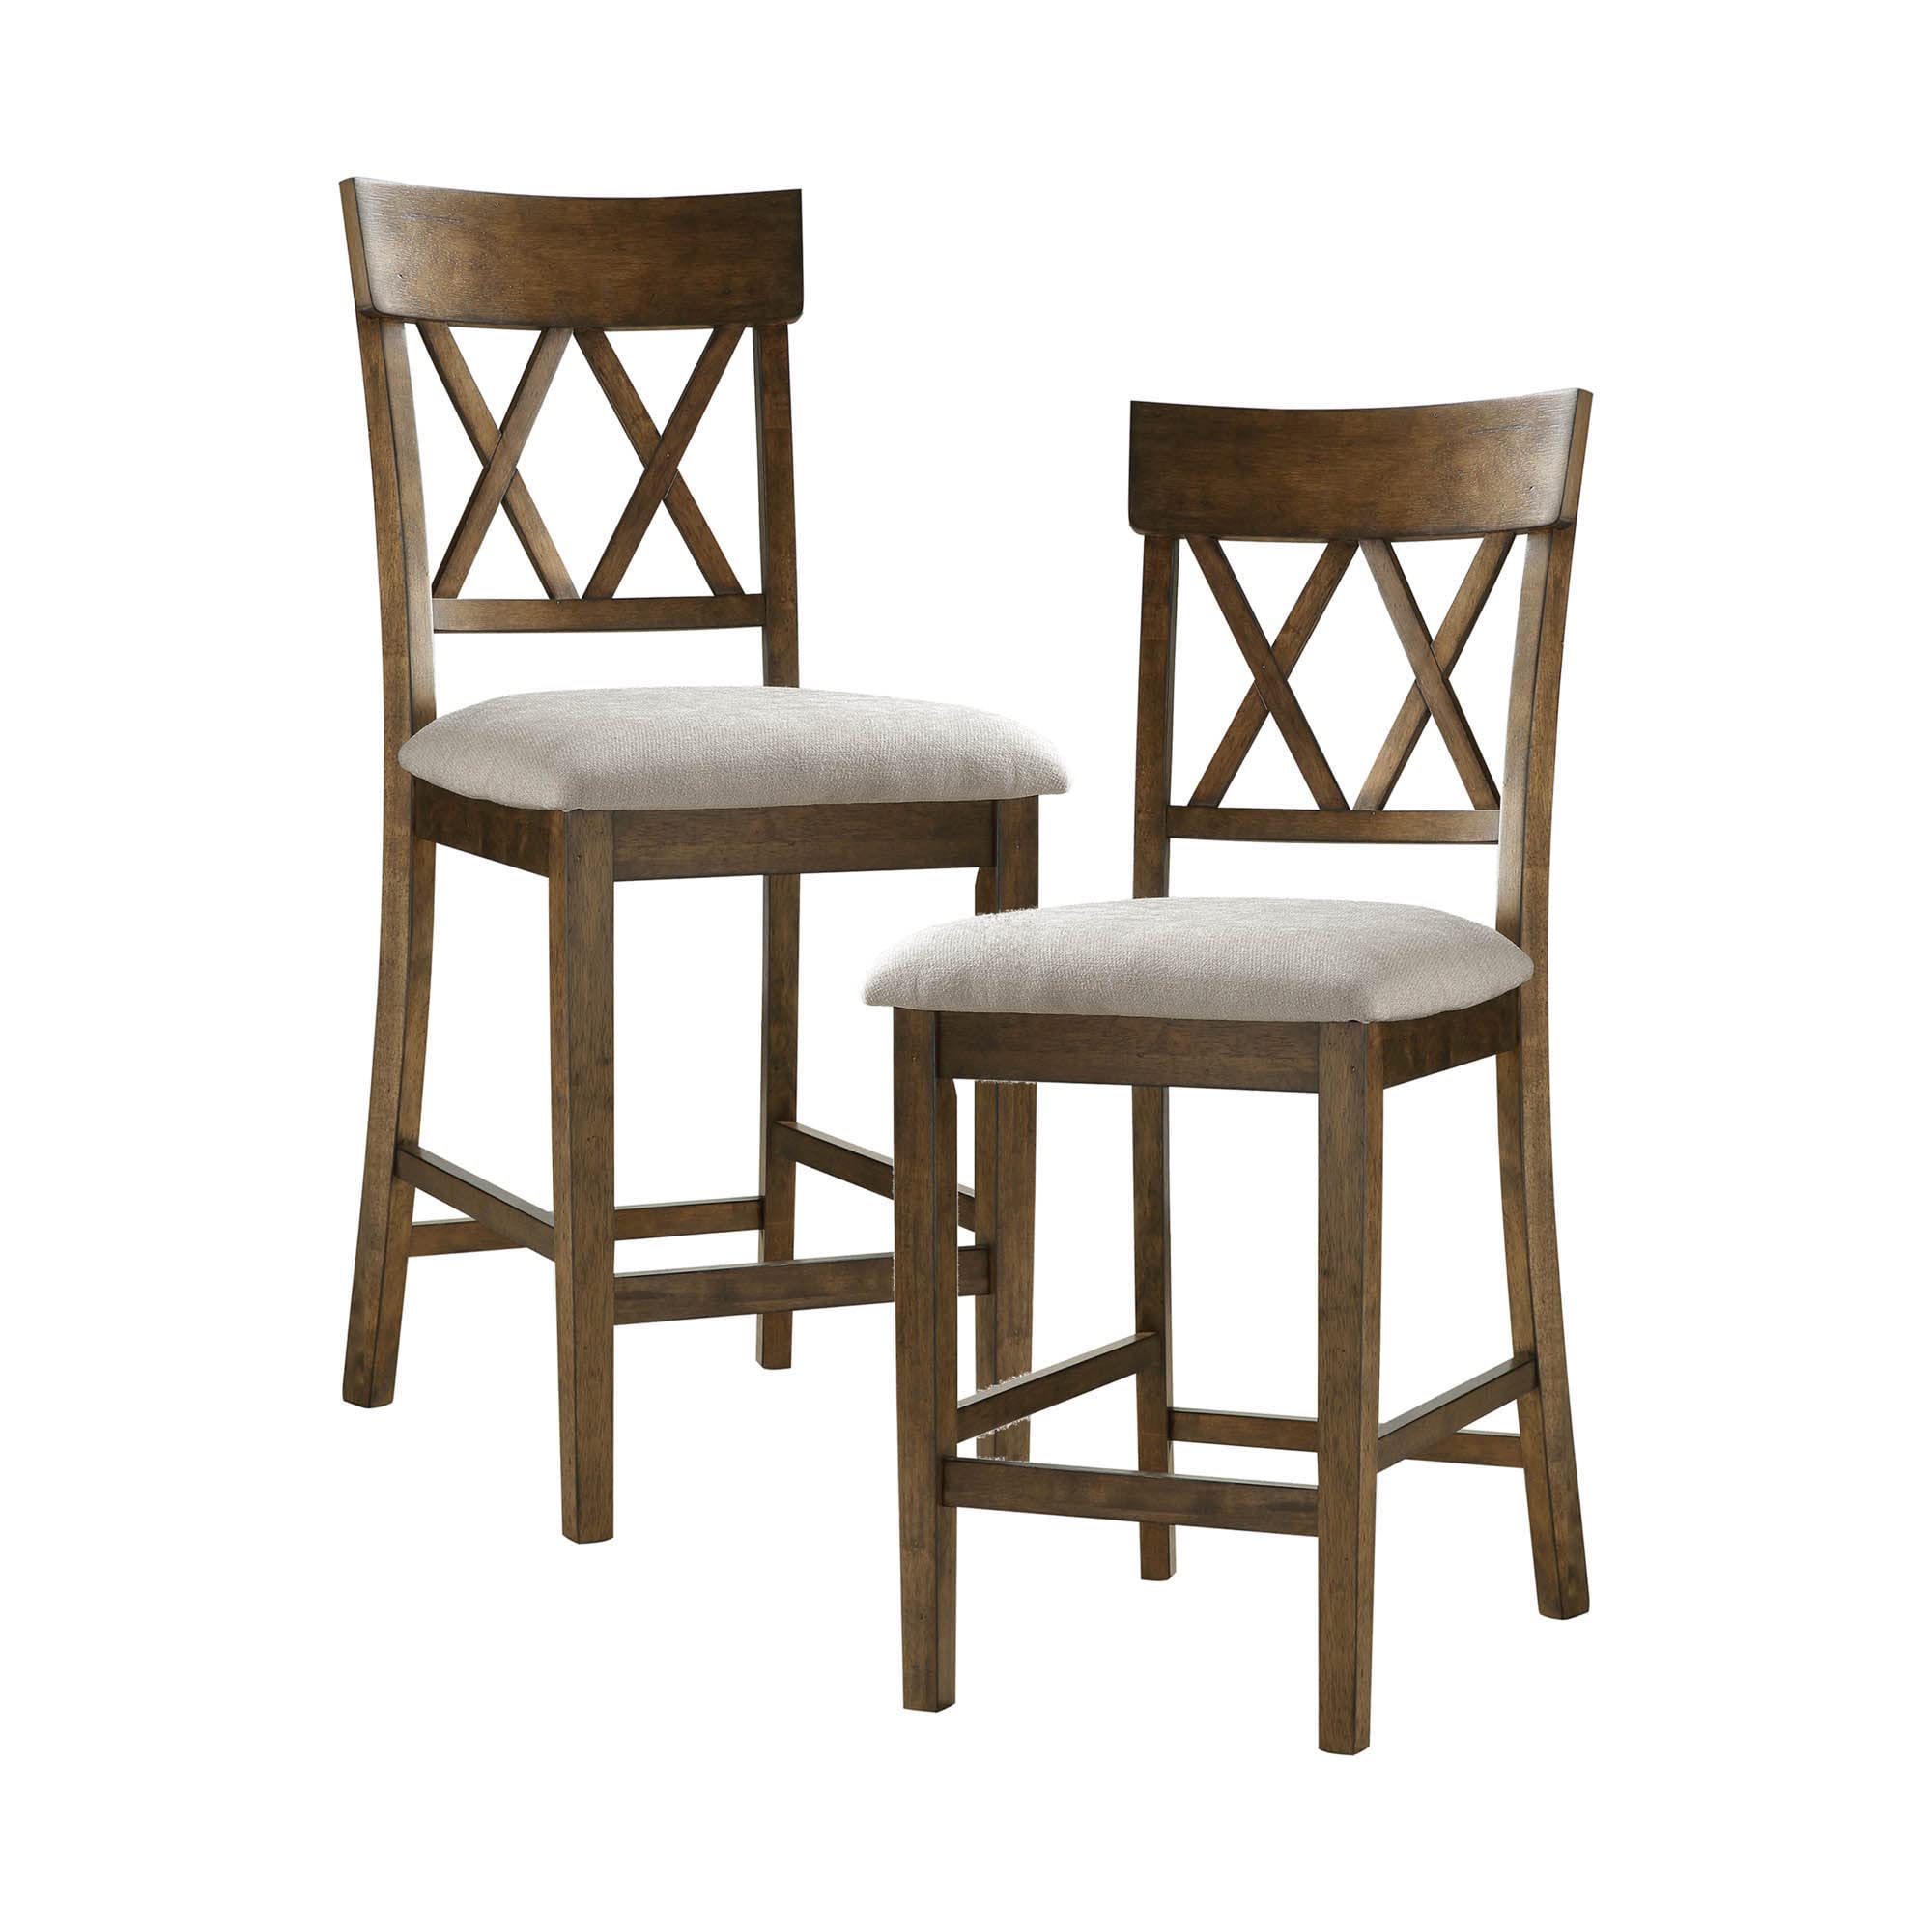 Offex Set of 2 Wood Counter Height Dining Chair with Double Cross Back - Light Oak